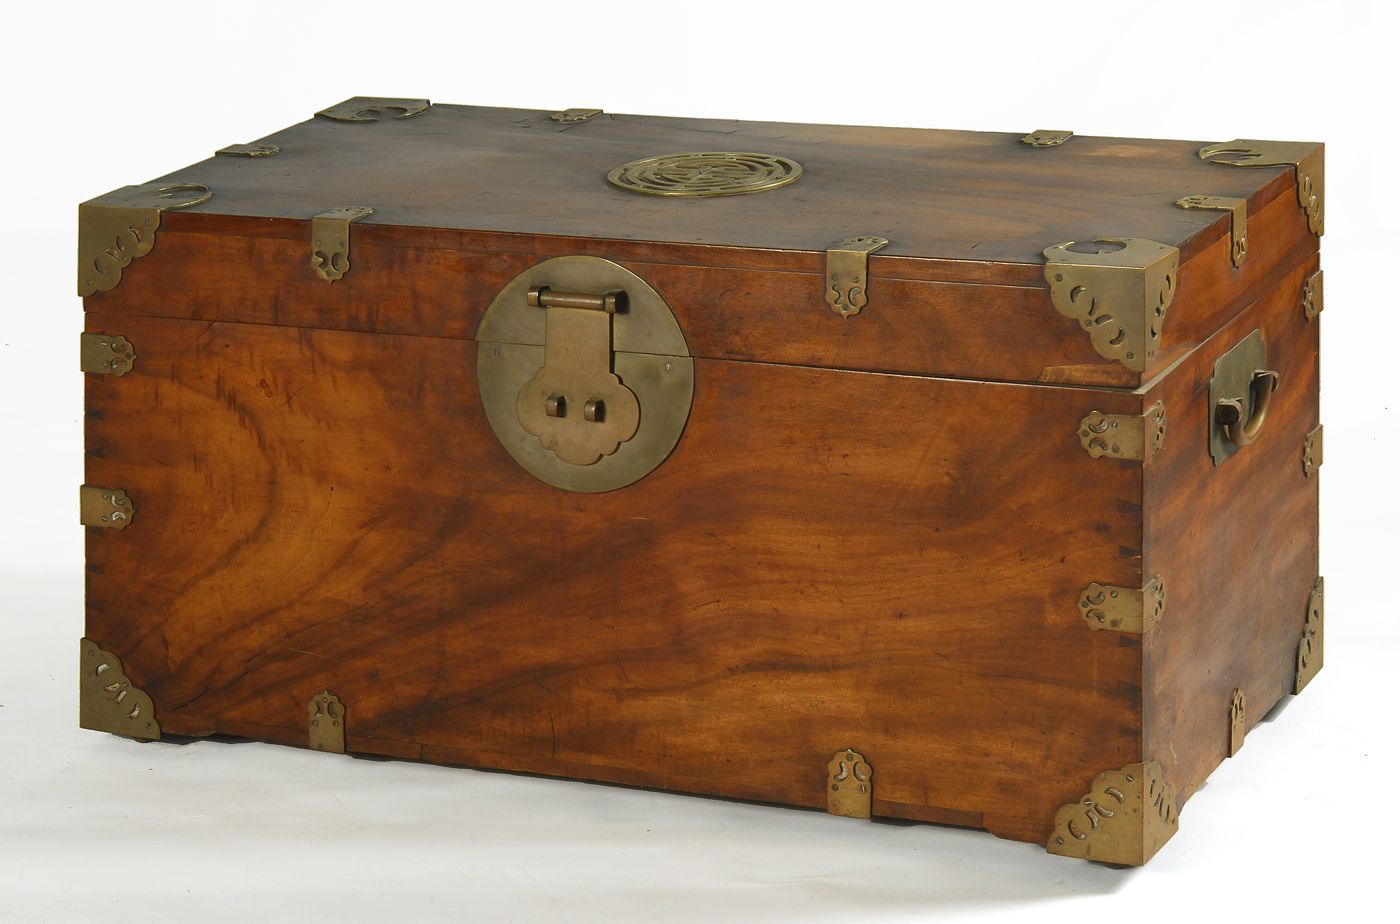 CHINESE CAMPHORWOOD LIFT-TOP CHEST19th